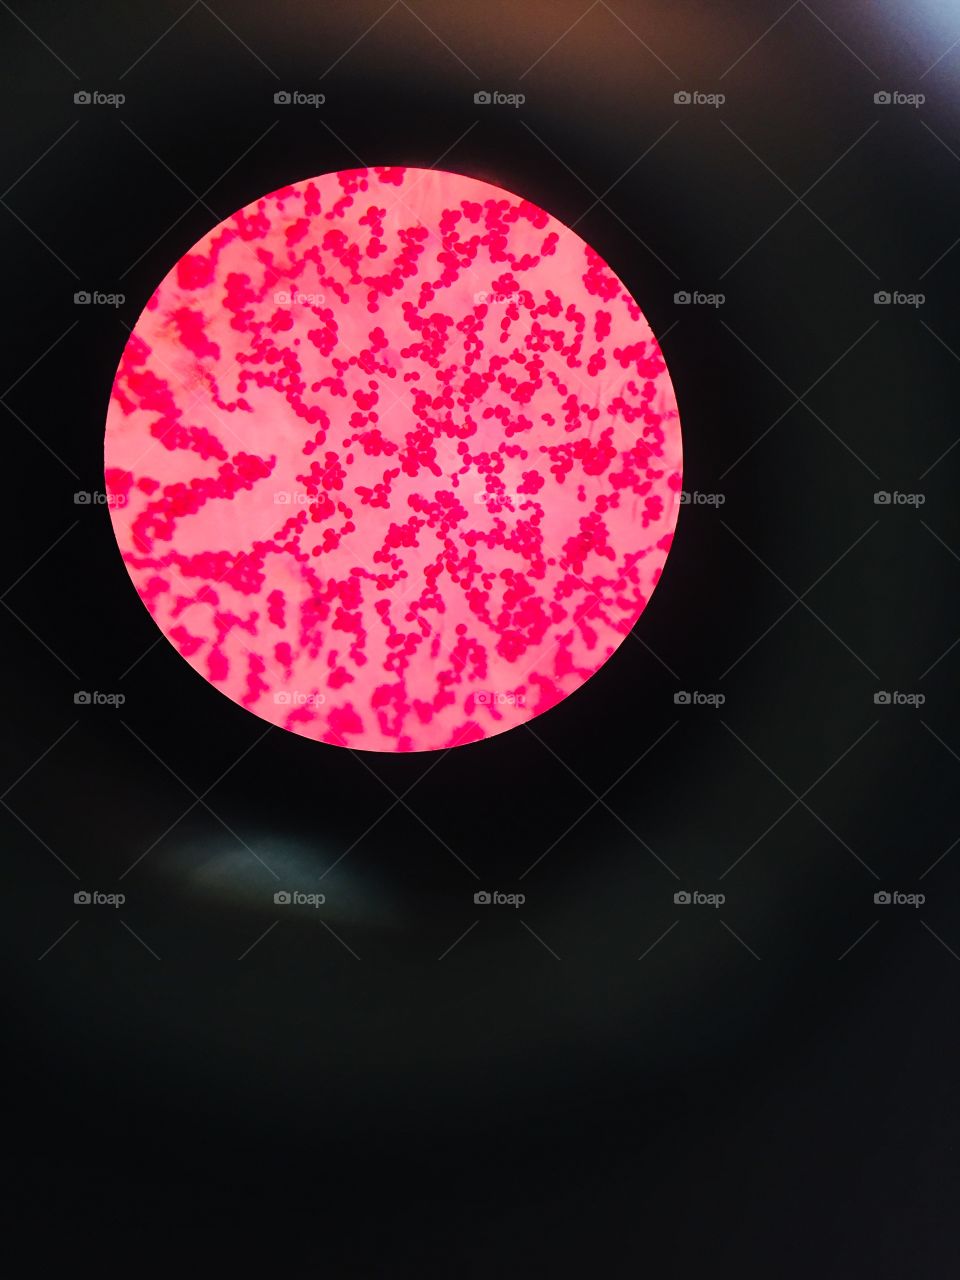 This is how red blood cells seen through microscope 🔬